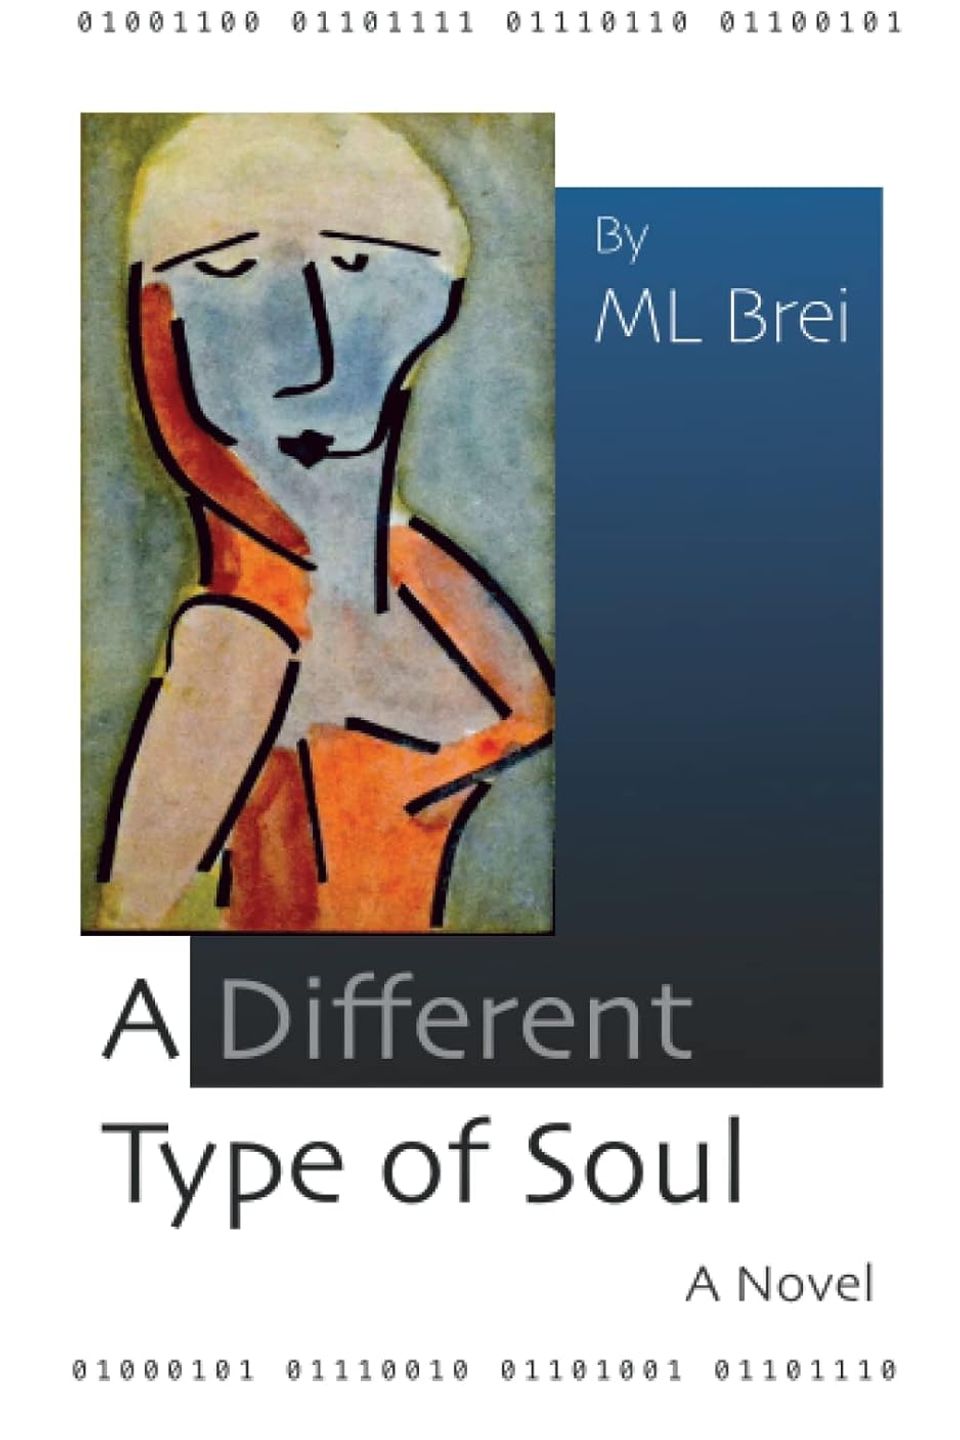 Ml brei a different type of soul